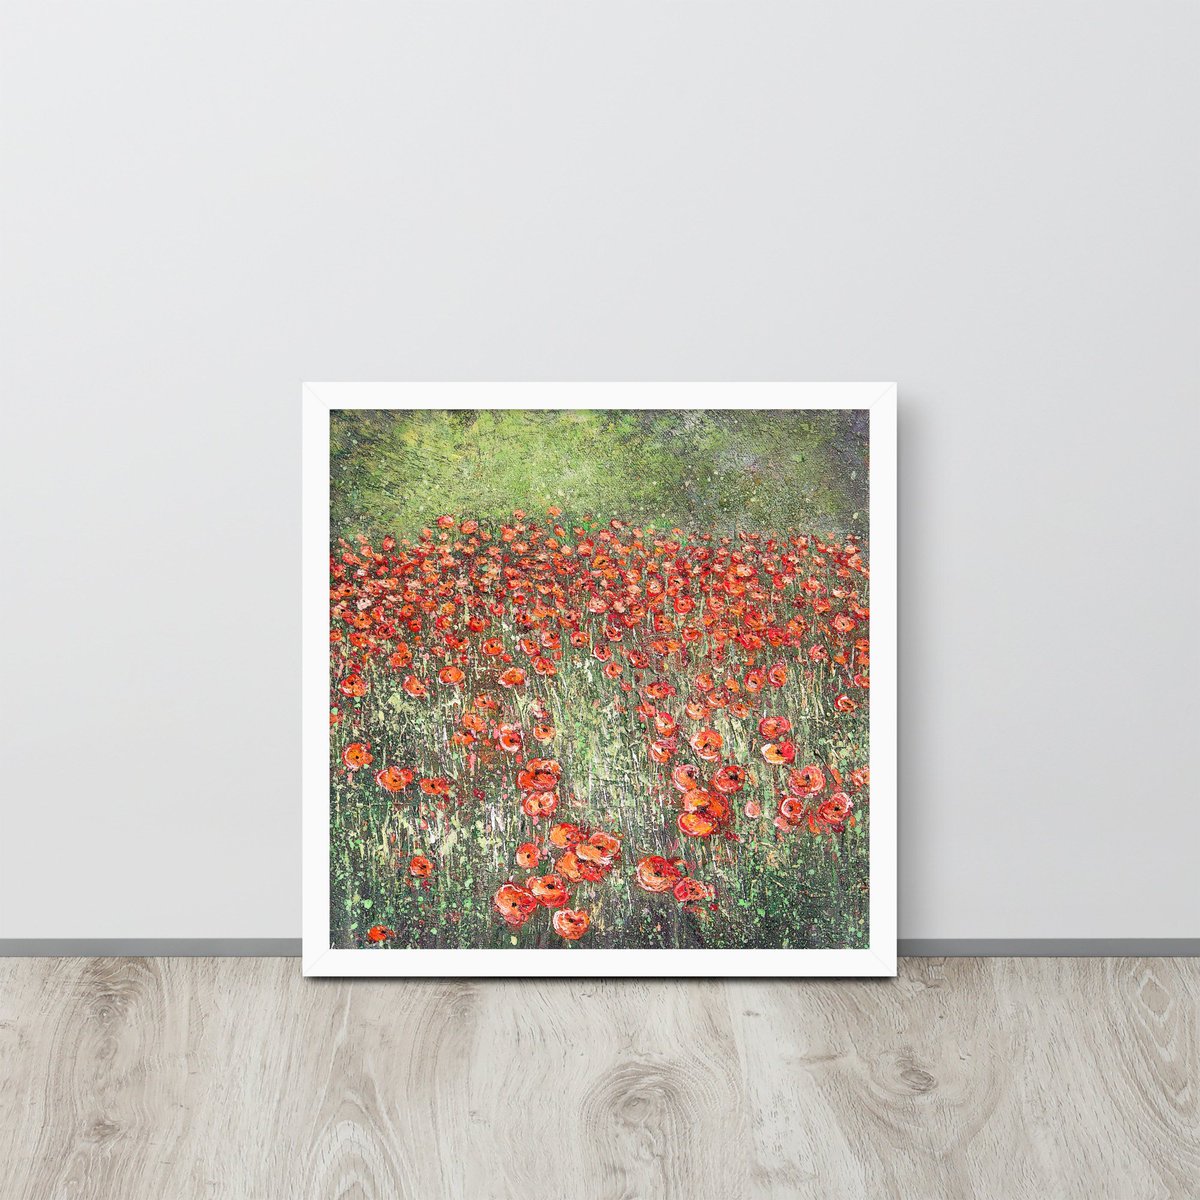 Poppy fever! It's that time of the year. ' Dancing Poppies' and 'Poppy Fields' available as prints and framed prints via my website ❤️🎨☀️😊

handonart.com/collections/wo…

#poppy #poppyfields #artprint #britishart #britishartist #britishpainter #poppyart